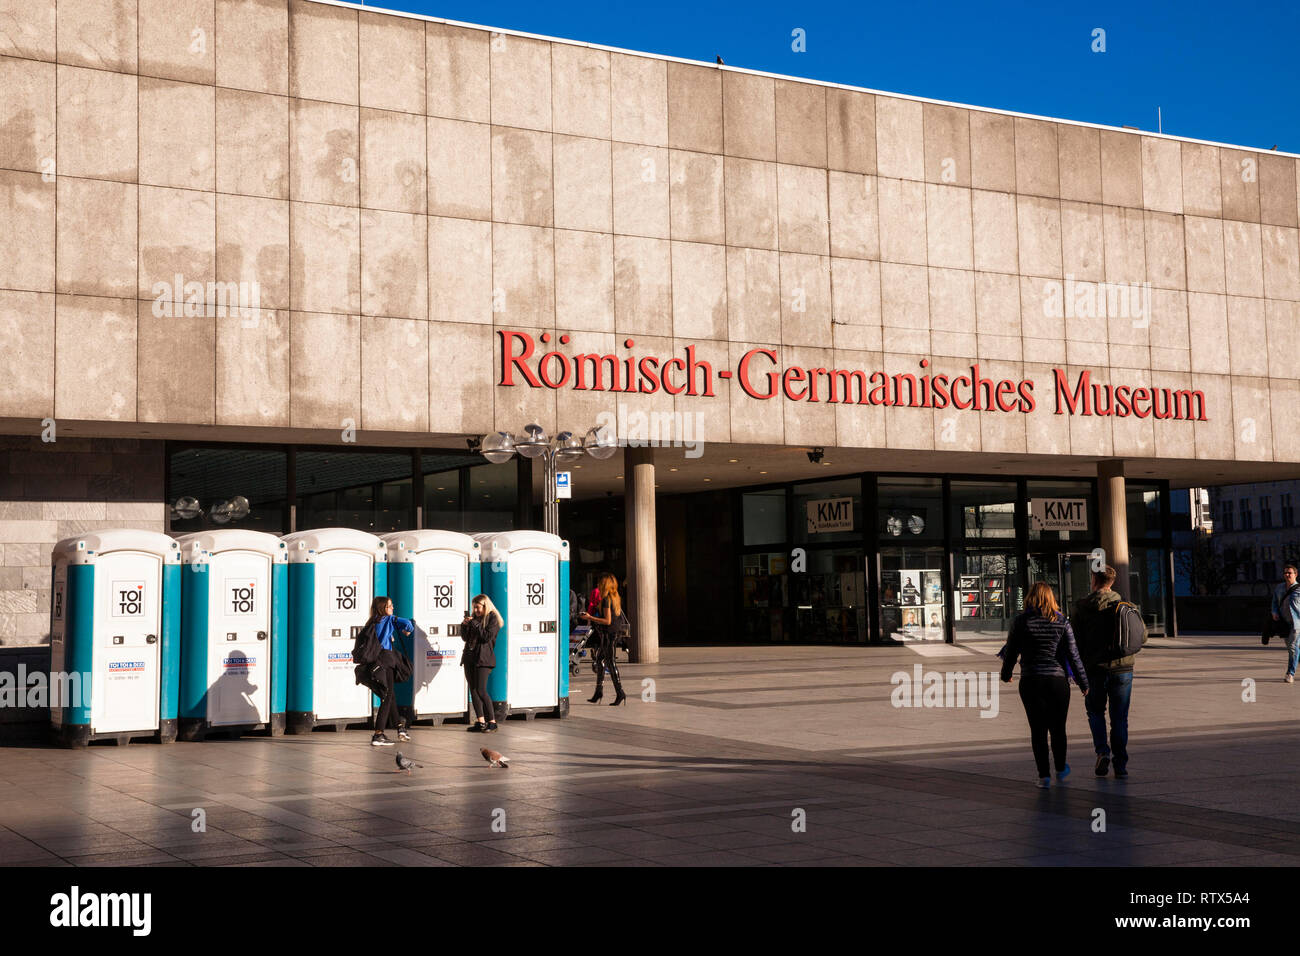 portable toilets in front of the Romano-Germanic Museum at the Roncalli square, Cologne, Germany.  Dixi Toiletten vor dem Roemisch-Germanischen Museum Stock Photo